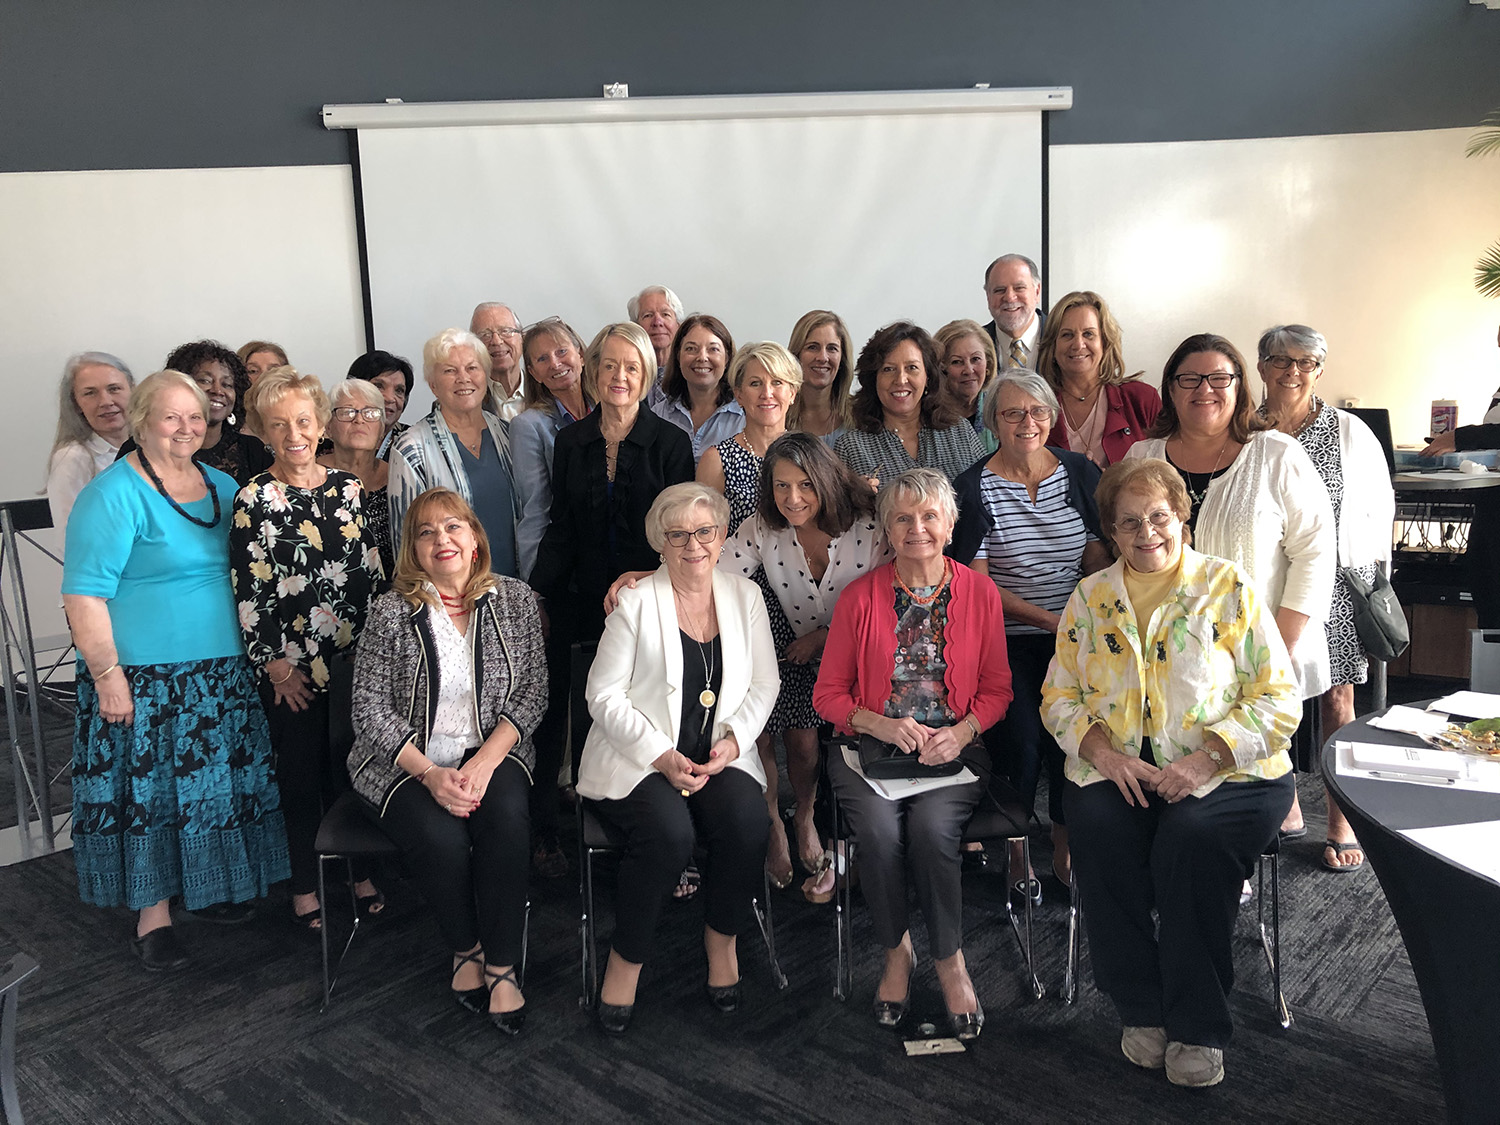 WCA members at the Woman’s Cancer Association of the University of Miami 59th Annual Ruth Self Memorial Education Day held on March 12, 2020 (picture taken pre-COVID 19)